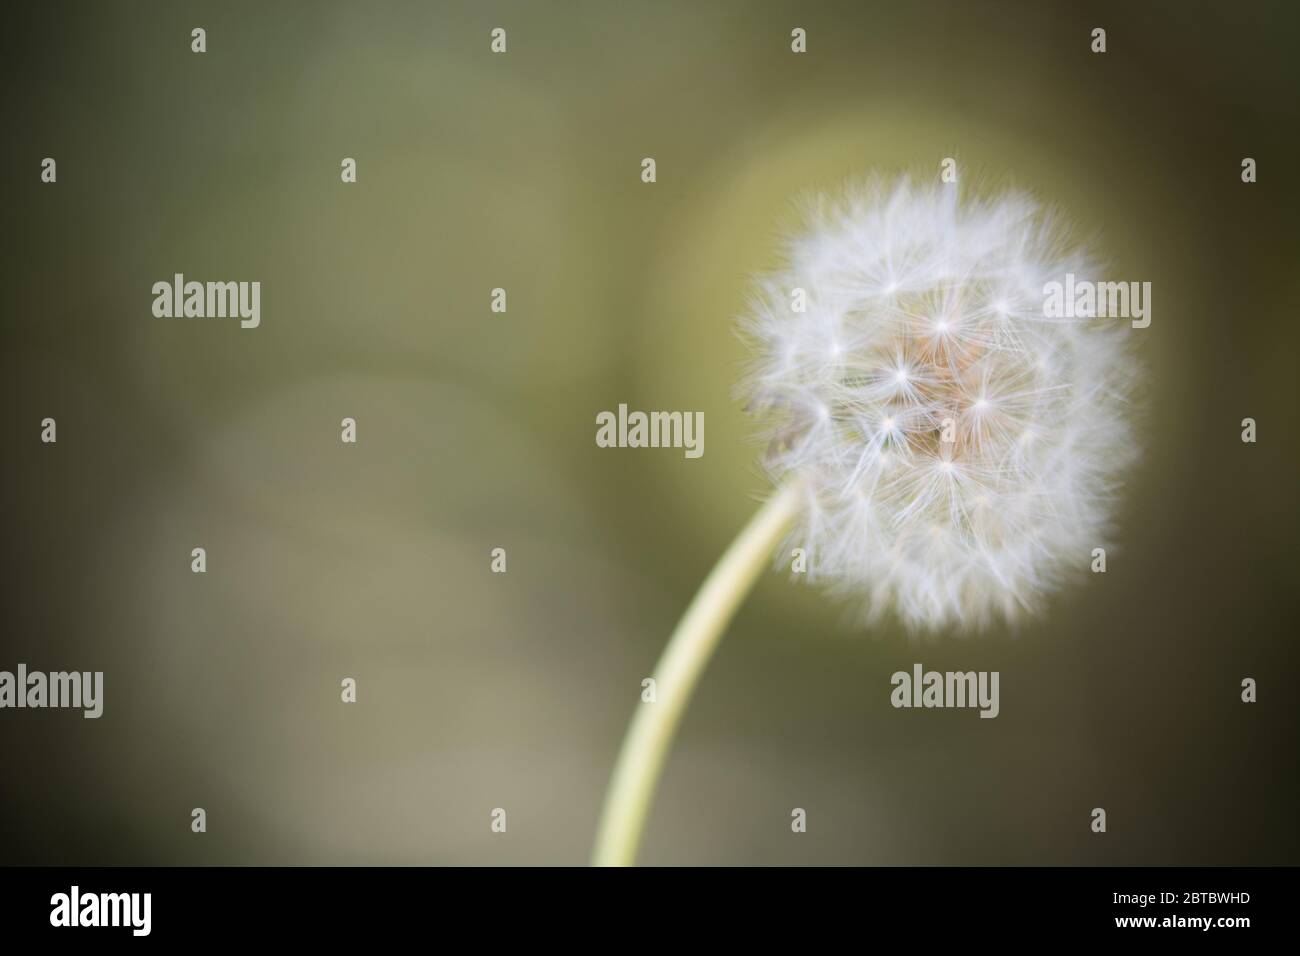 Seed head of Dandelion flower at th end of biologic cycle Stock Photo